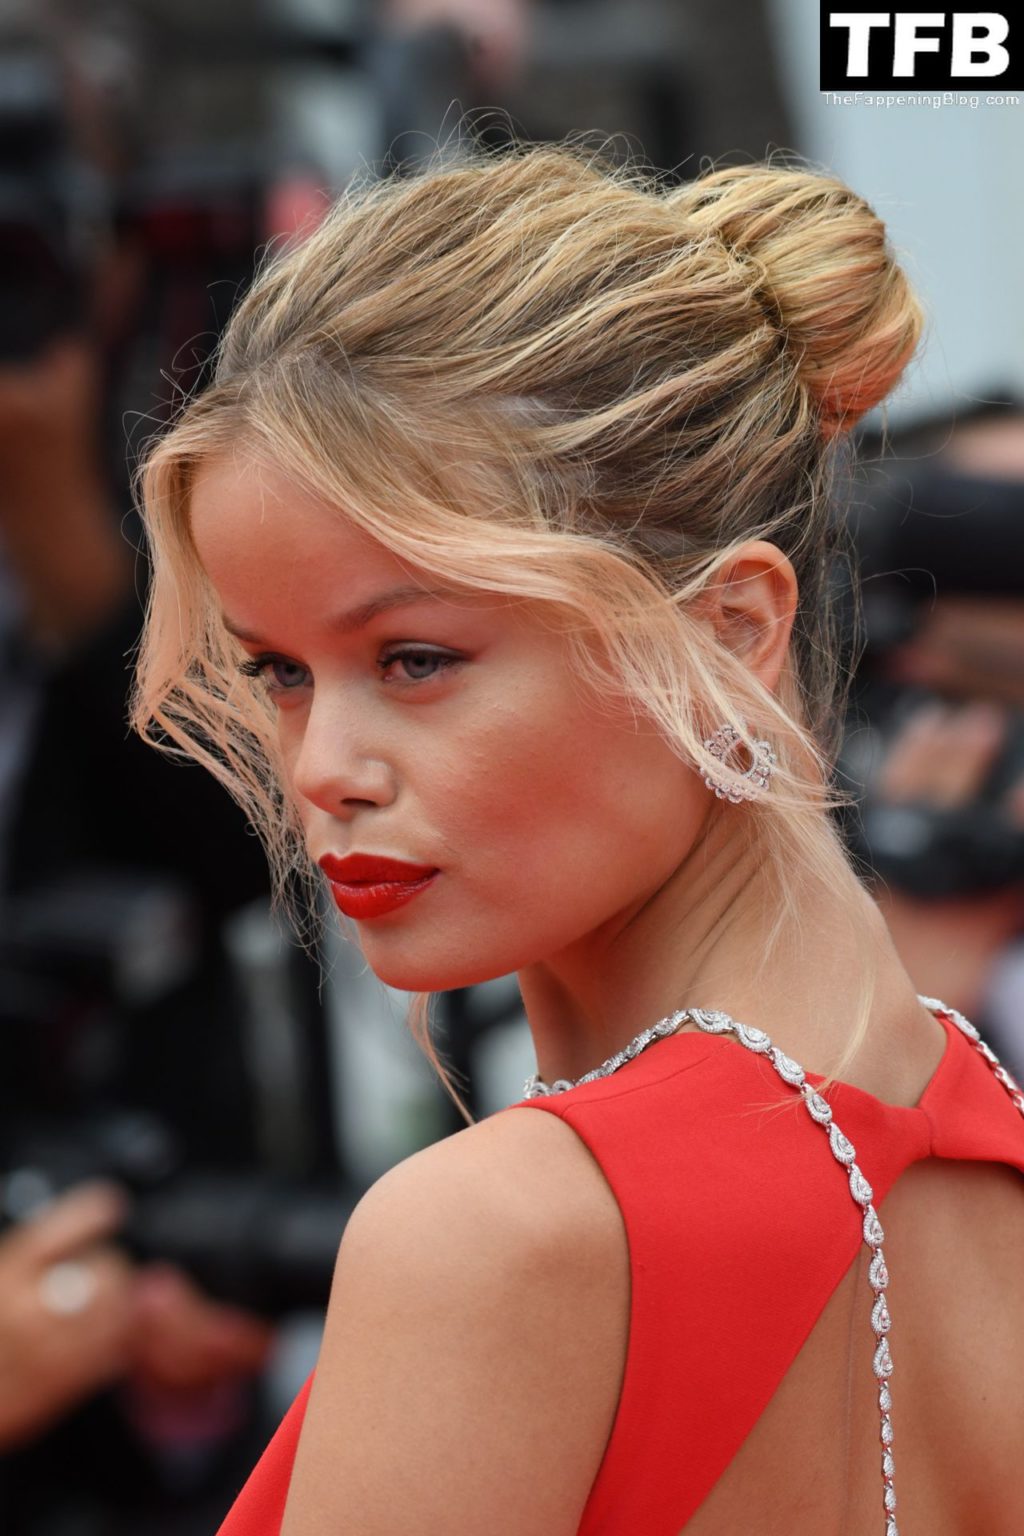 Frida Aasen Sexy The Fappening Blog 137 1024x1536 - Frida Aasen Looks Stunning in a Red Dress at the 75th Annual Cannes Film Festival (153 Photos)